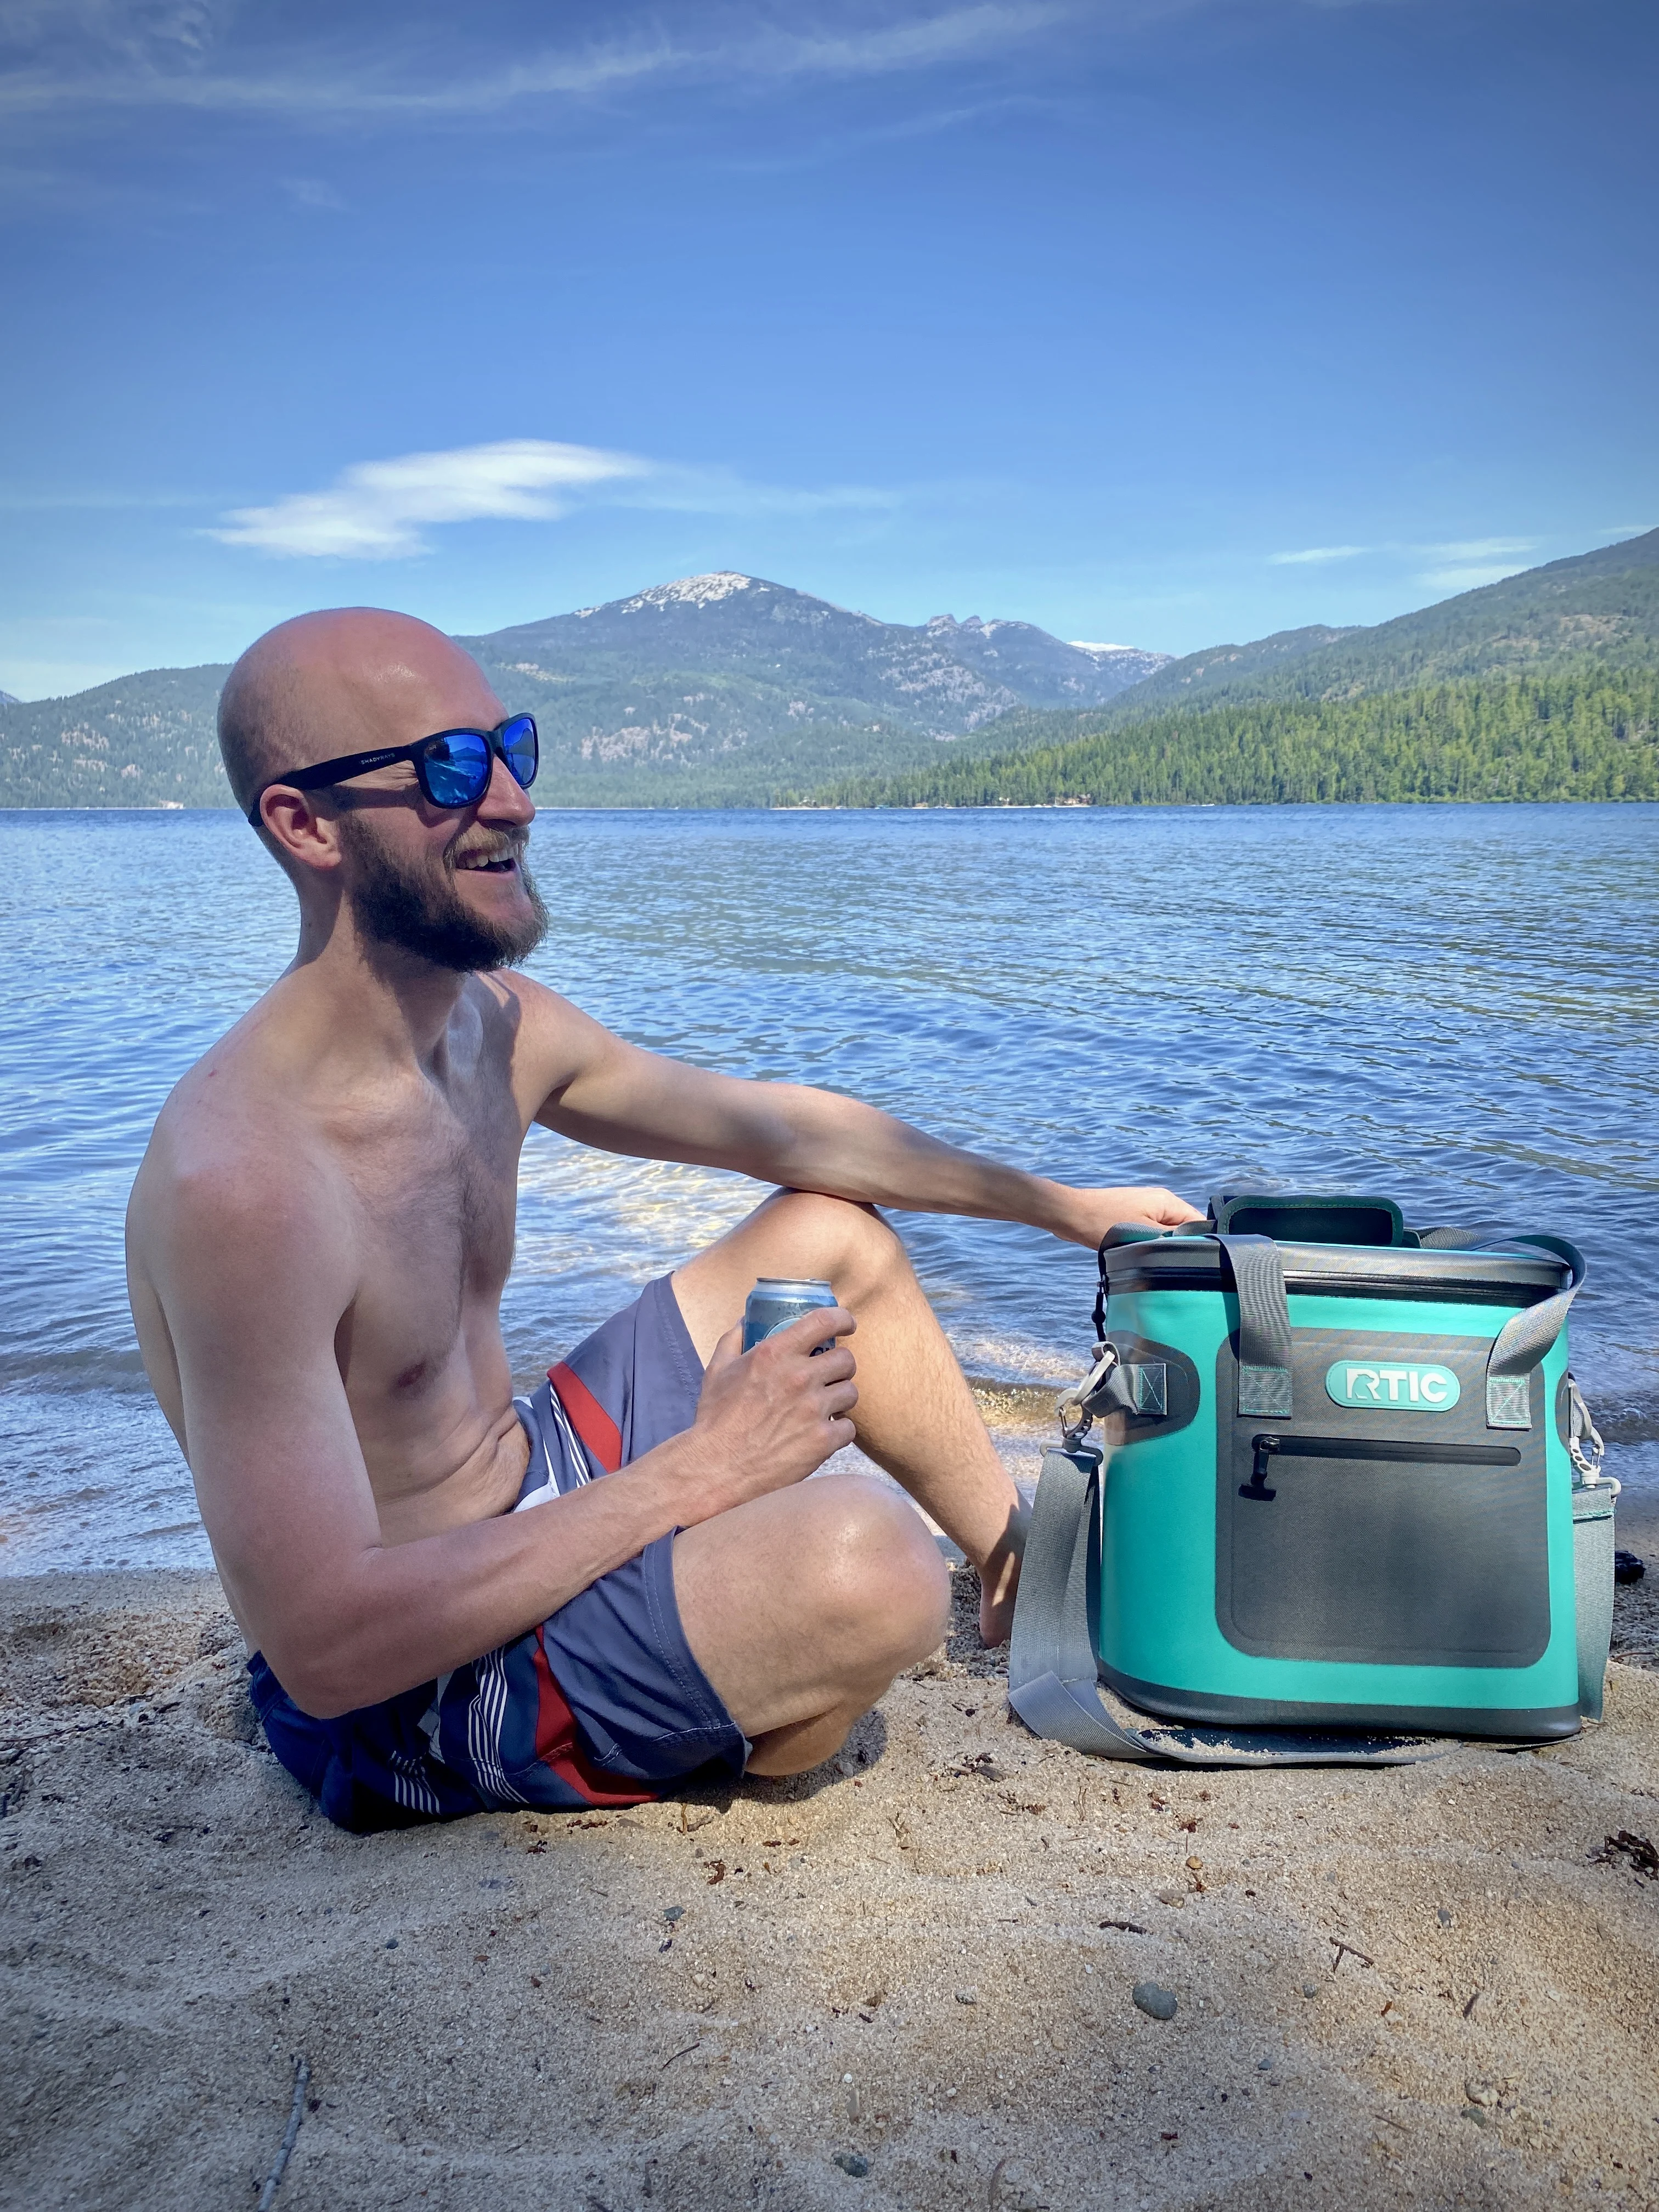 Jake sitting on the beach with an rtic cooler which is the perfect piece of camping gear under $20